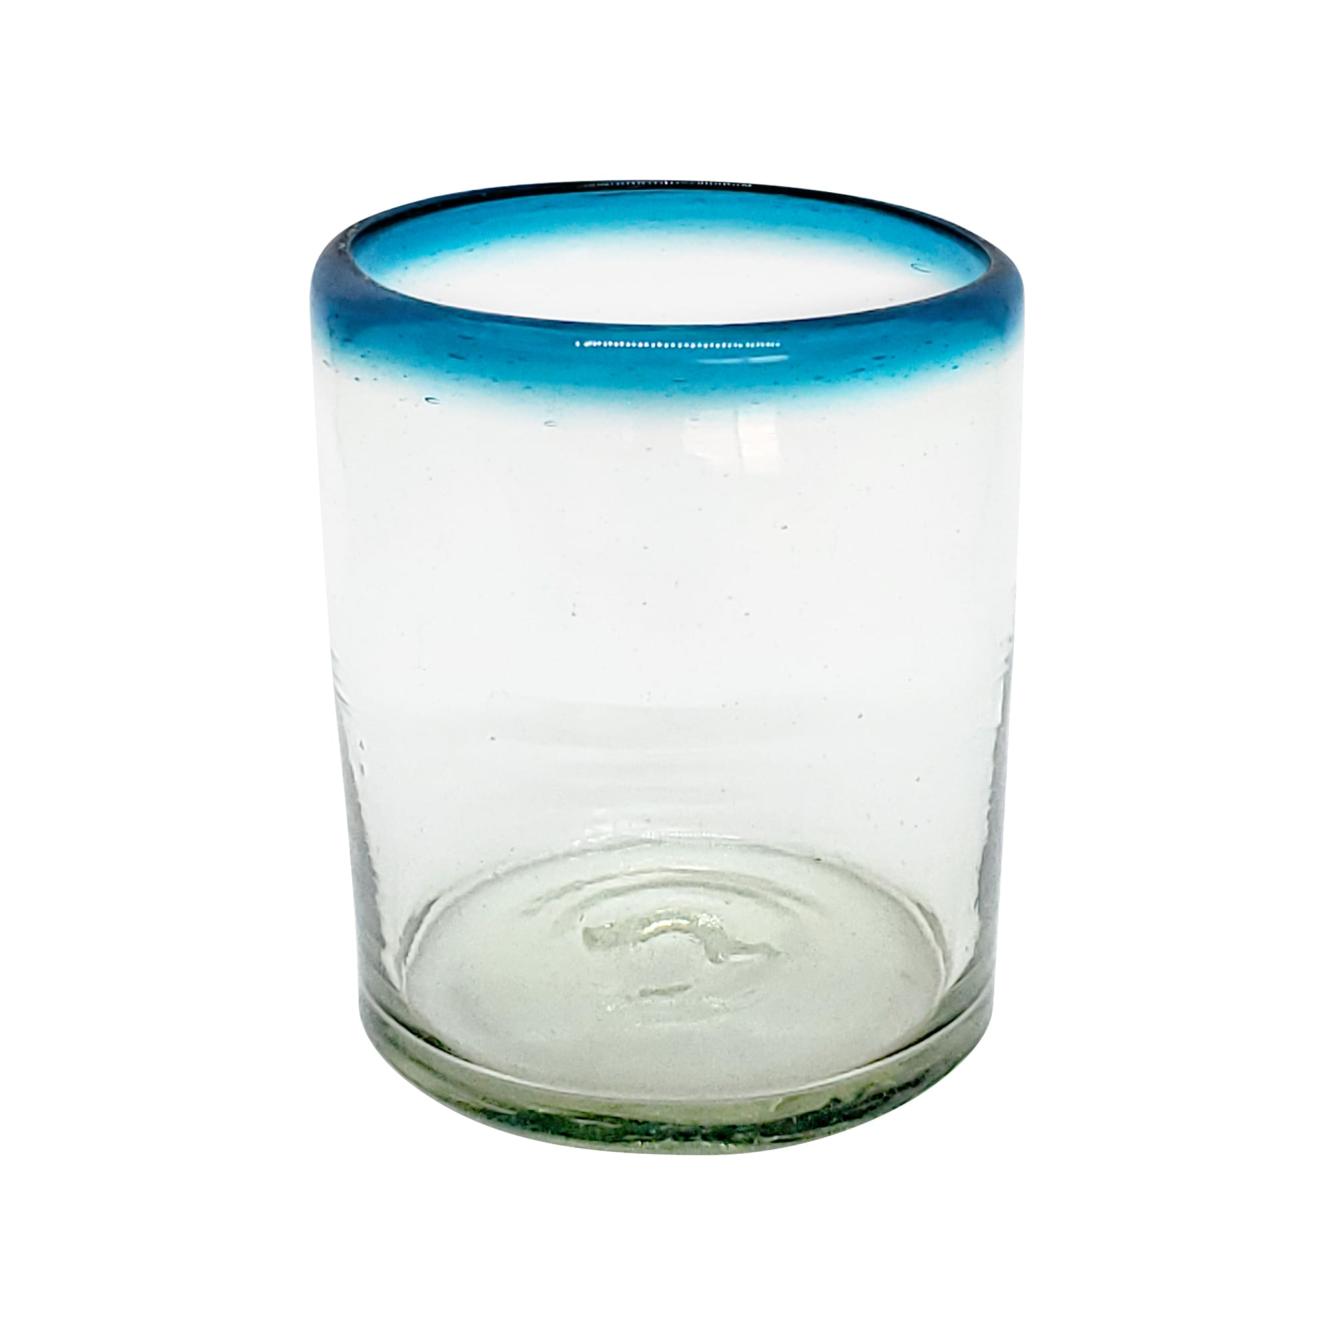 Wholesale MEXICAN GLASSWARE / Aqua Blue Rim 10 oz Tumblers  / These tumblers are a great complement for your pitcher and drinking glasses set.<br>1-Year Product Replacement in case of defects (glasses broken in dishwasher is considered a defect).